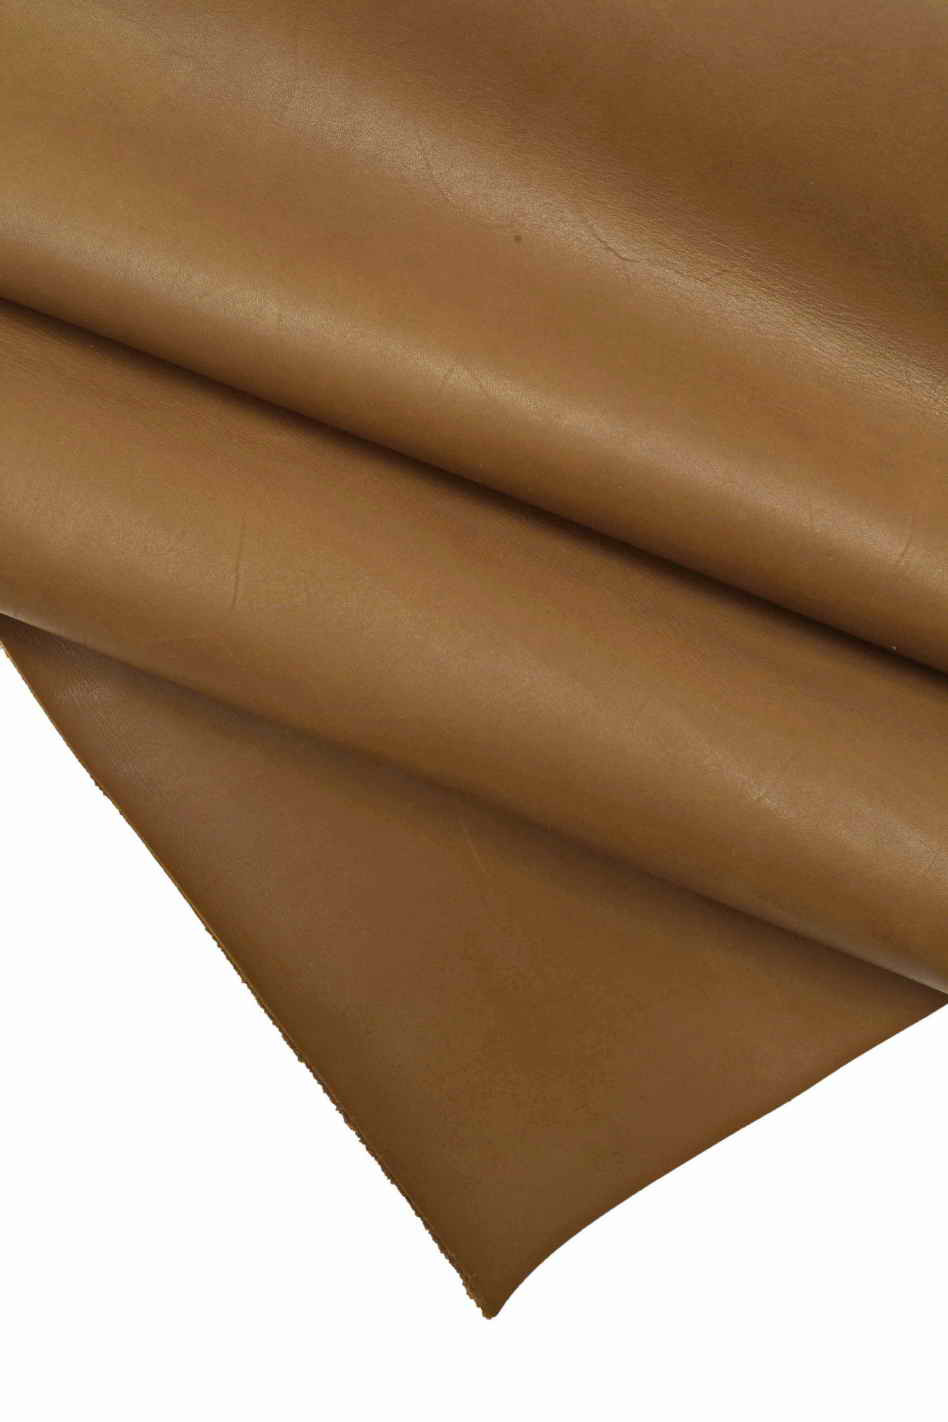 ITALIAN BROWN COLOR leather sheets